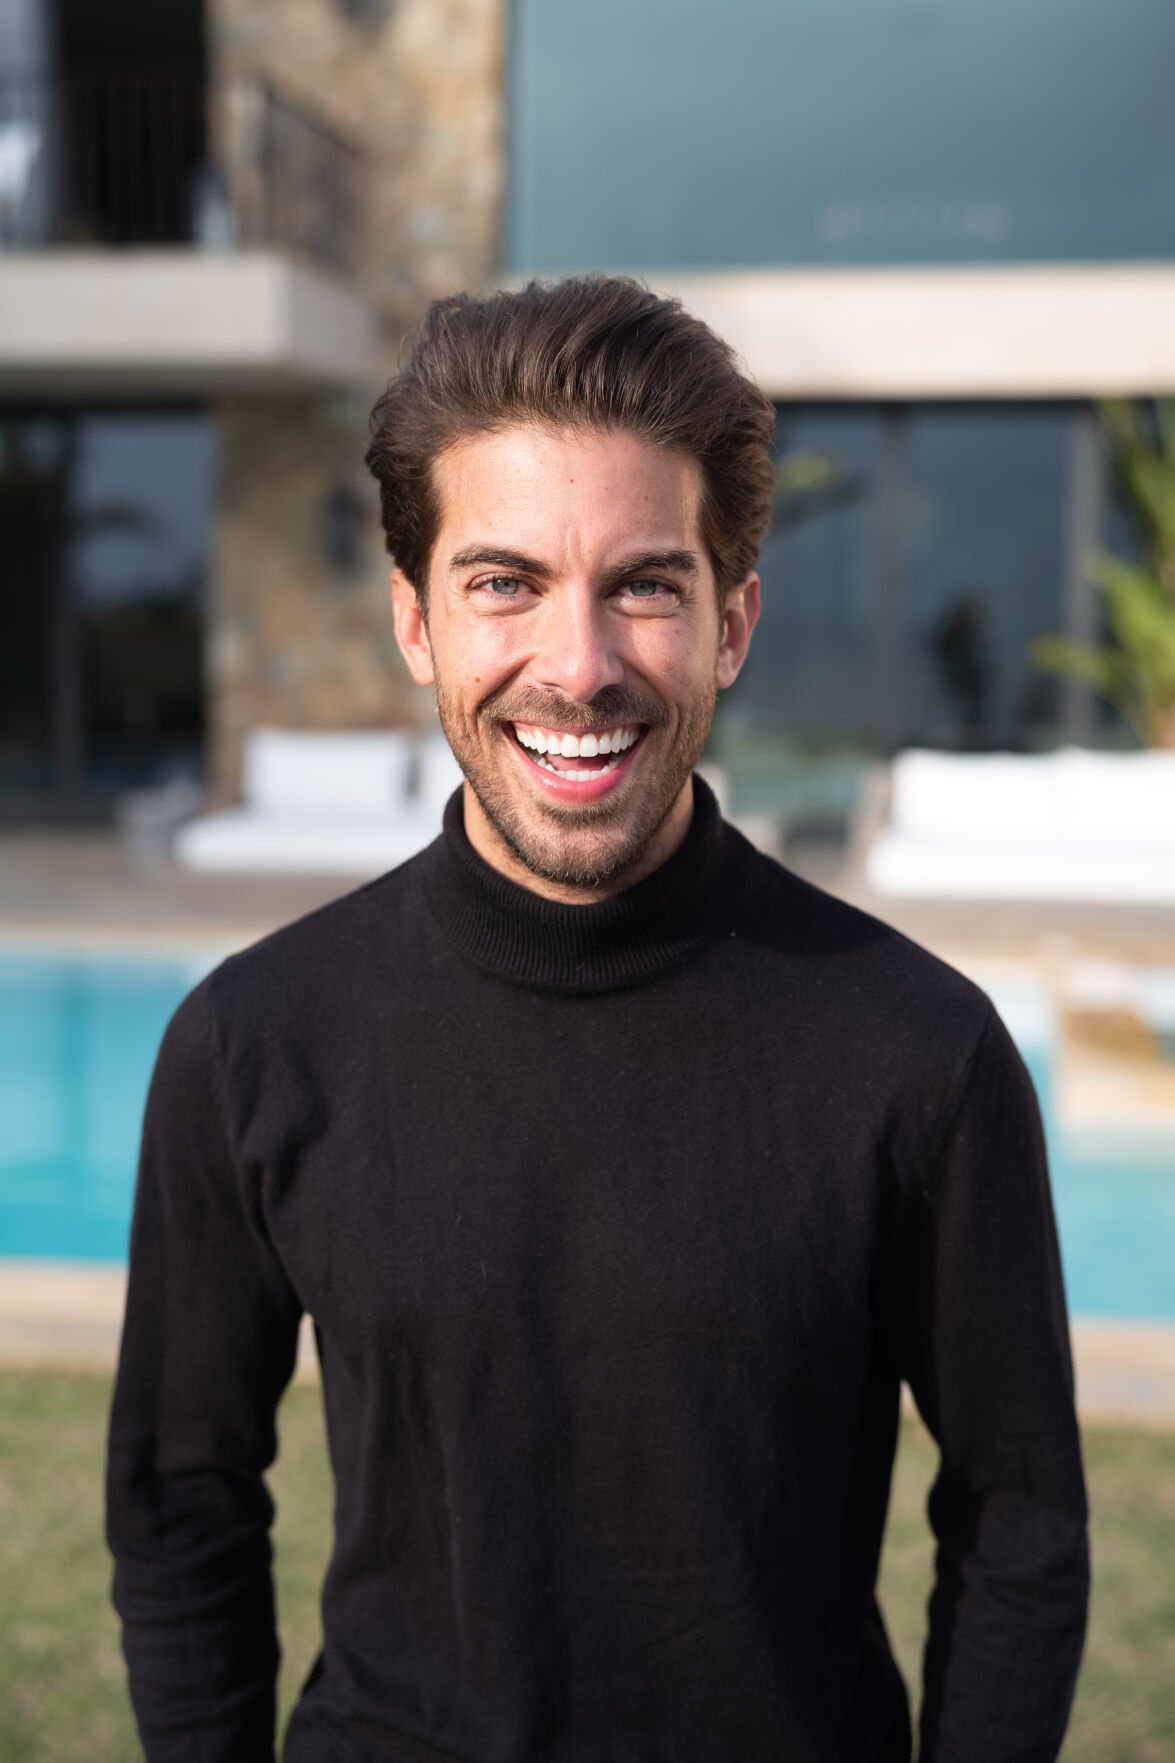 The perfect getaway: An interview with Luis D. Ortiz of Netflix